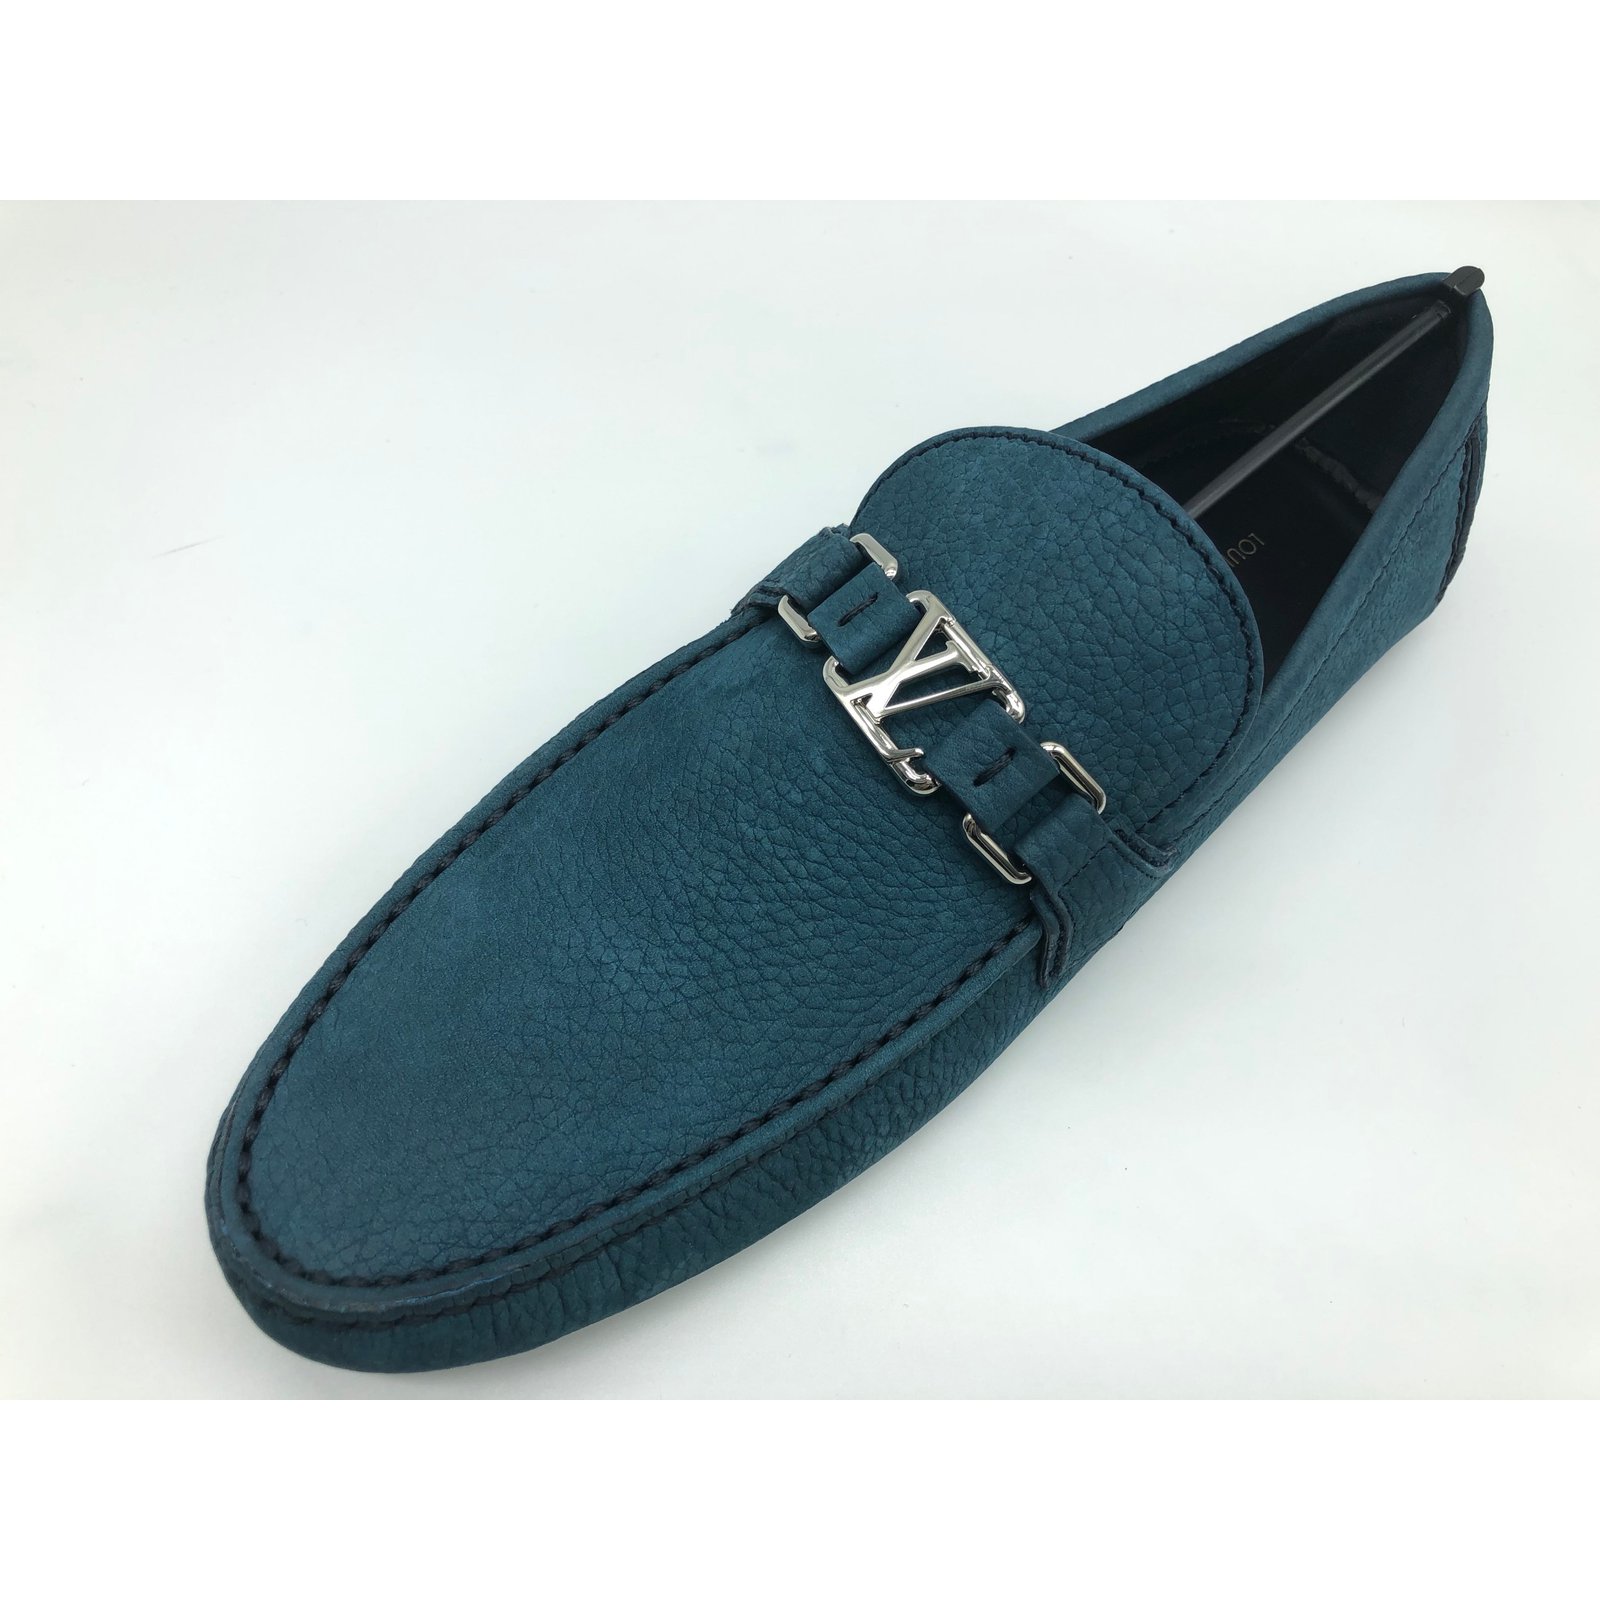 Sold at Auction: LOUIS VUITTON - HOCKENHEIM SUEDE MOCCASIN LOAFERS